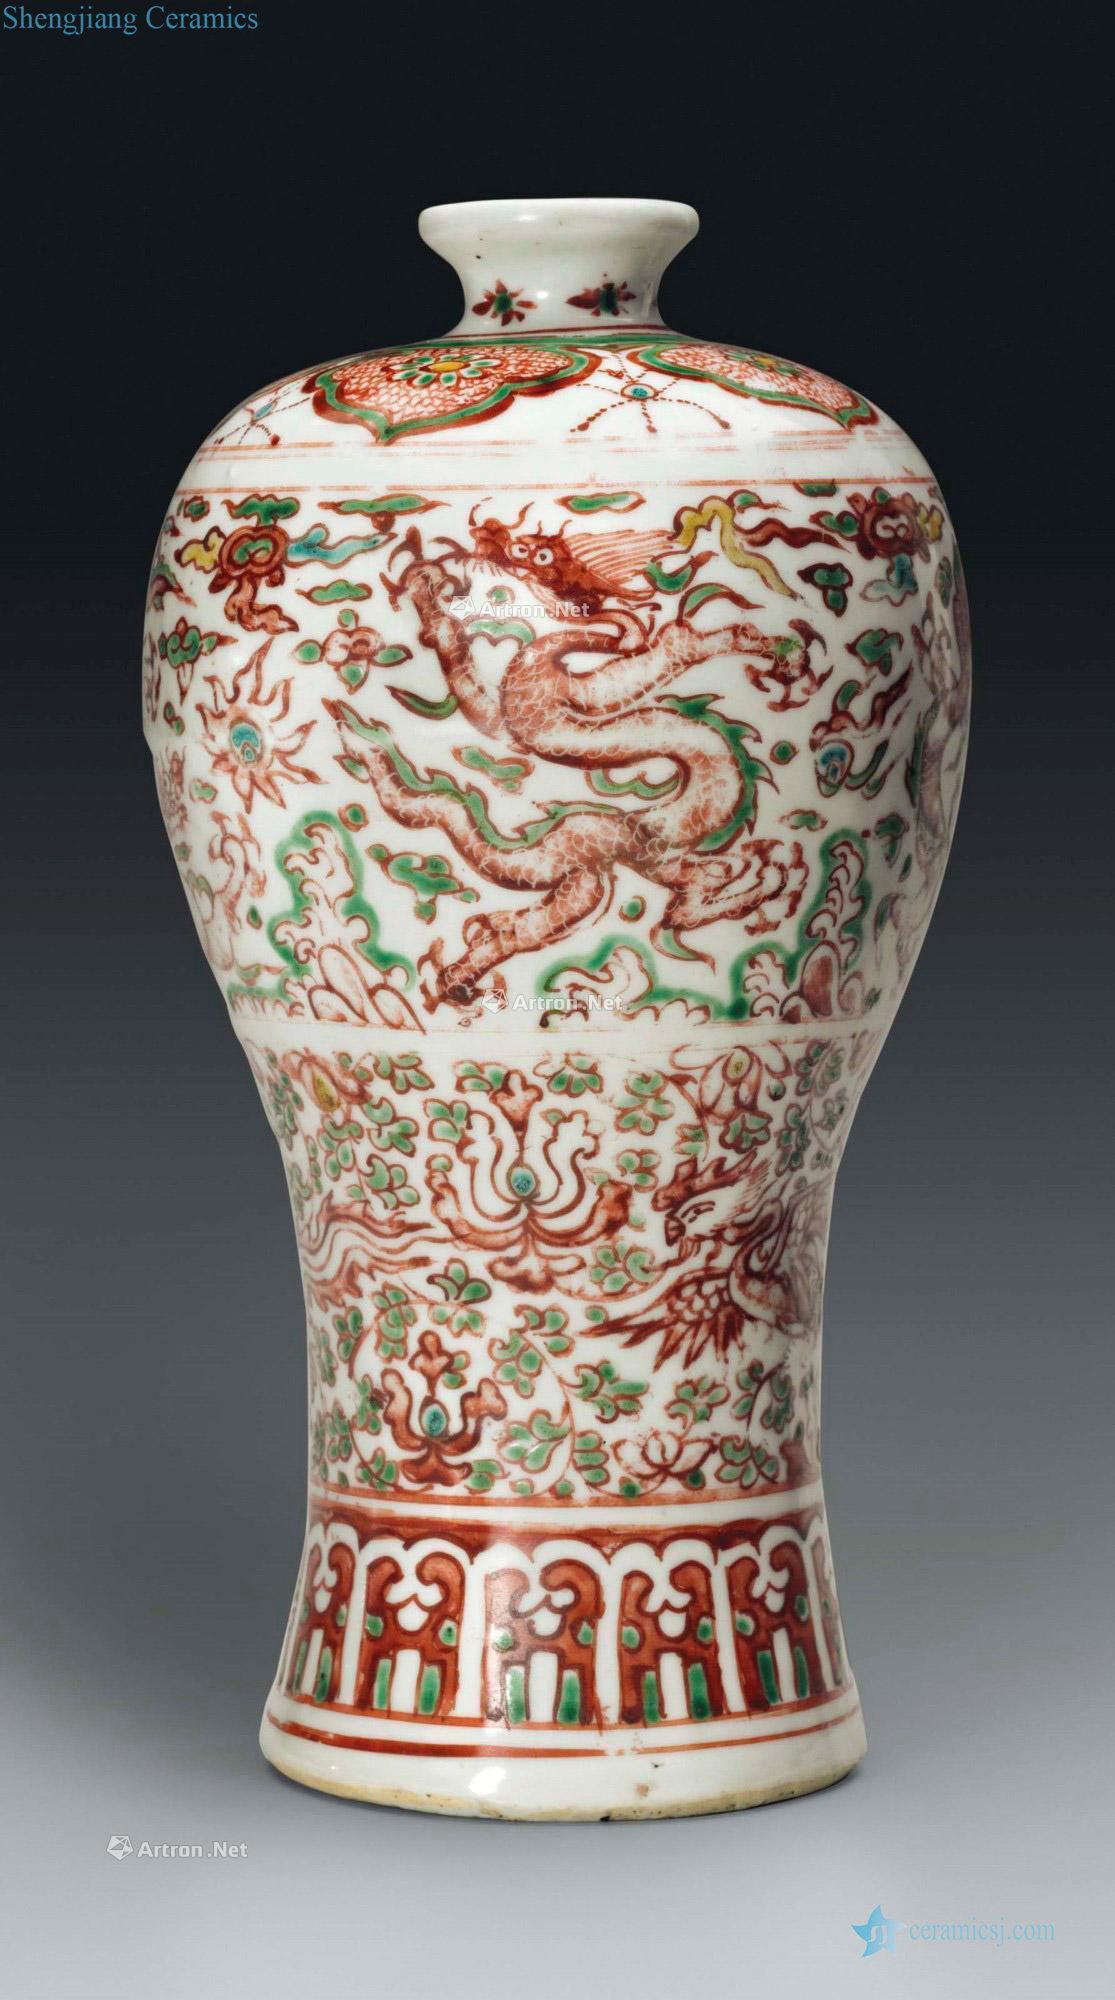 The newest MING DYNASTY, the 16 th CENTURY A RARE IRON - RED, GREEN, YELLOW AND TURQUOISE - GLAZED VASE, MEIPING